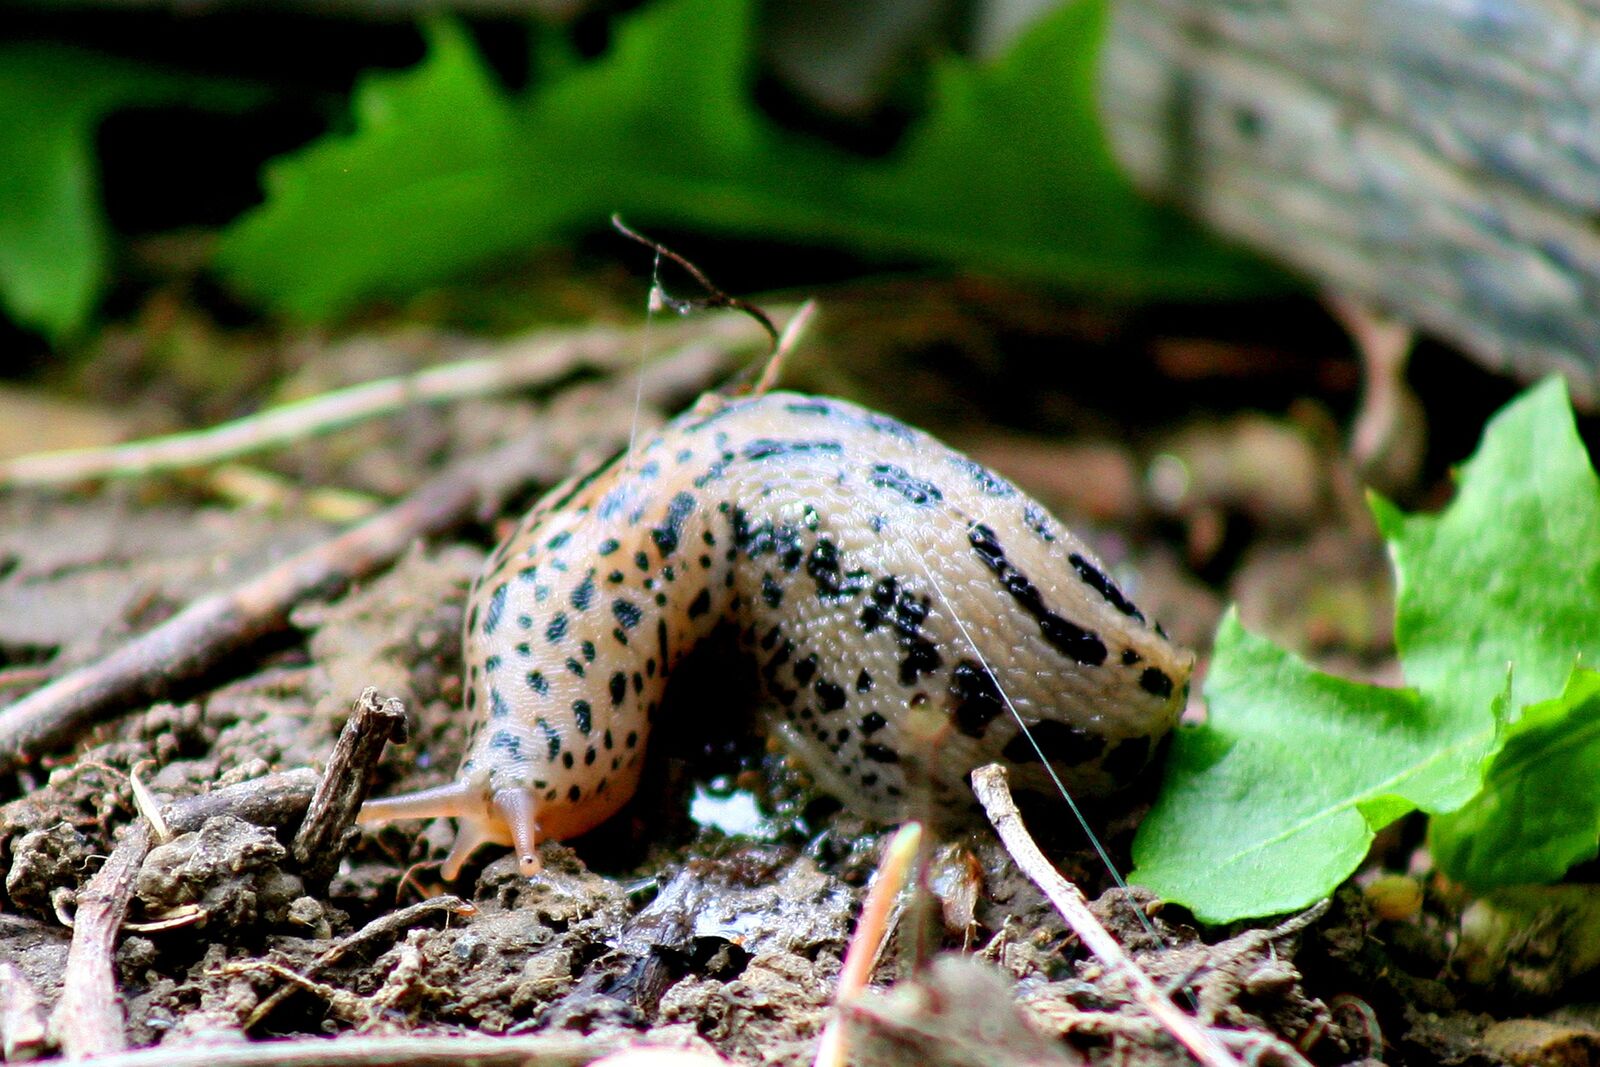 Tiger snail, a beneficial snail insect